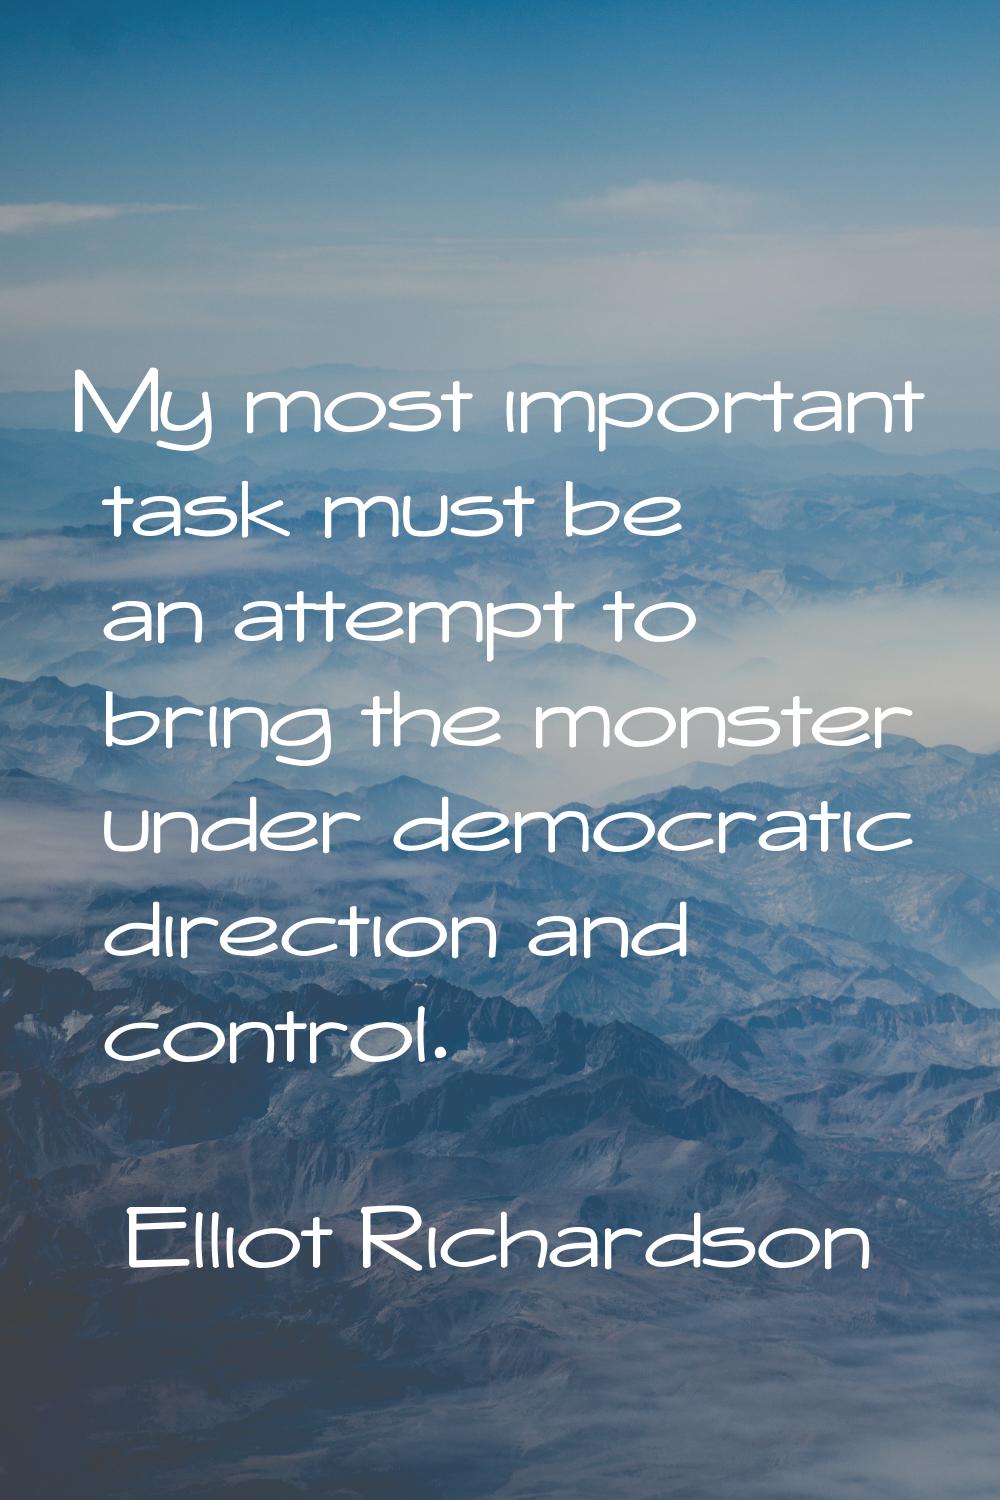 My most important task must be an attempt to bring the monster under democratic direction and contr